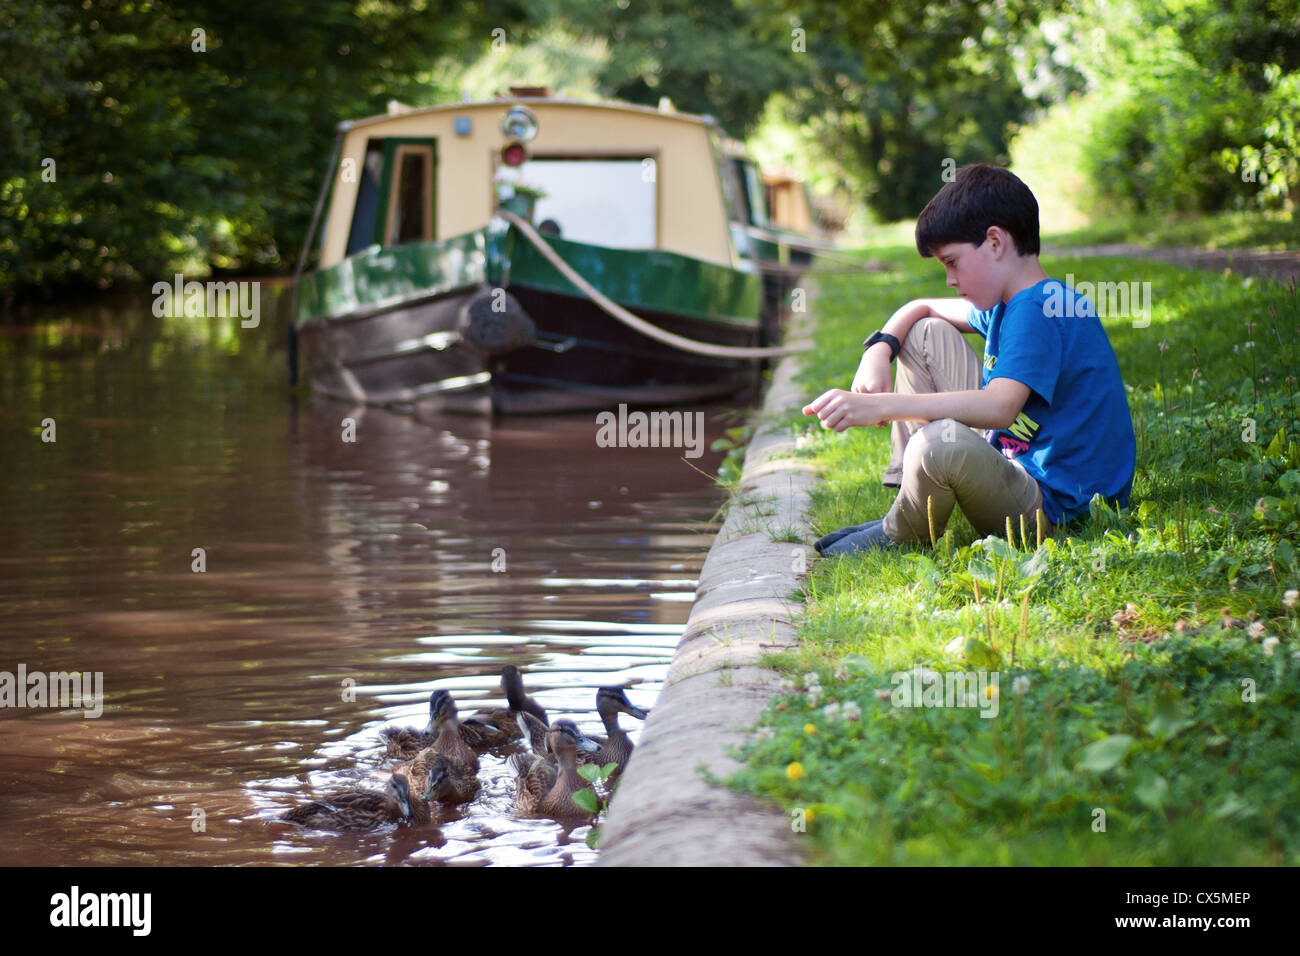 A young boy (10 years) sitting on a grassy canal bank feeding ducks with a canal boat behind Stock Photo